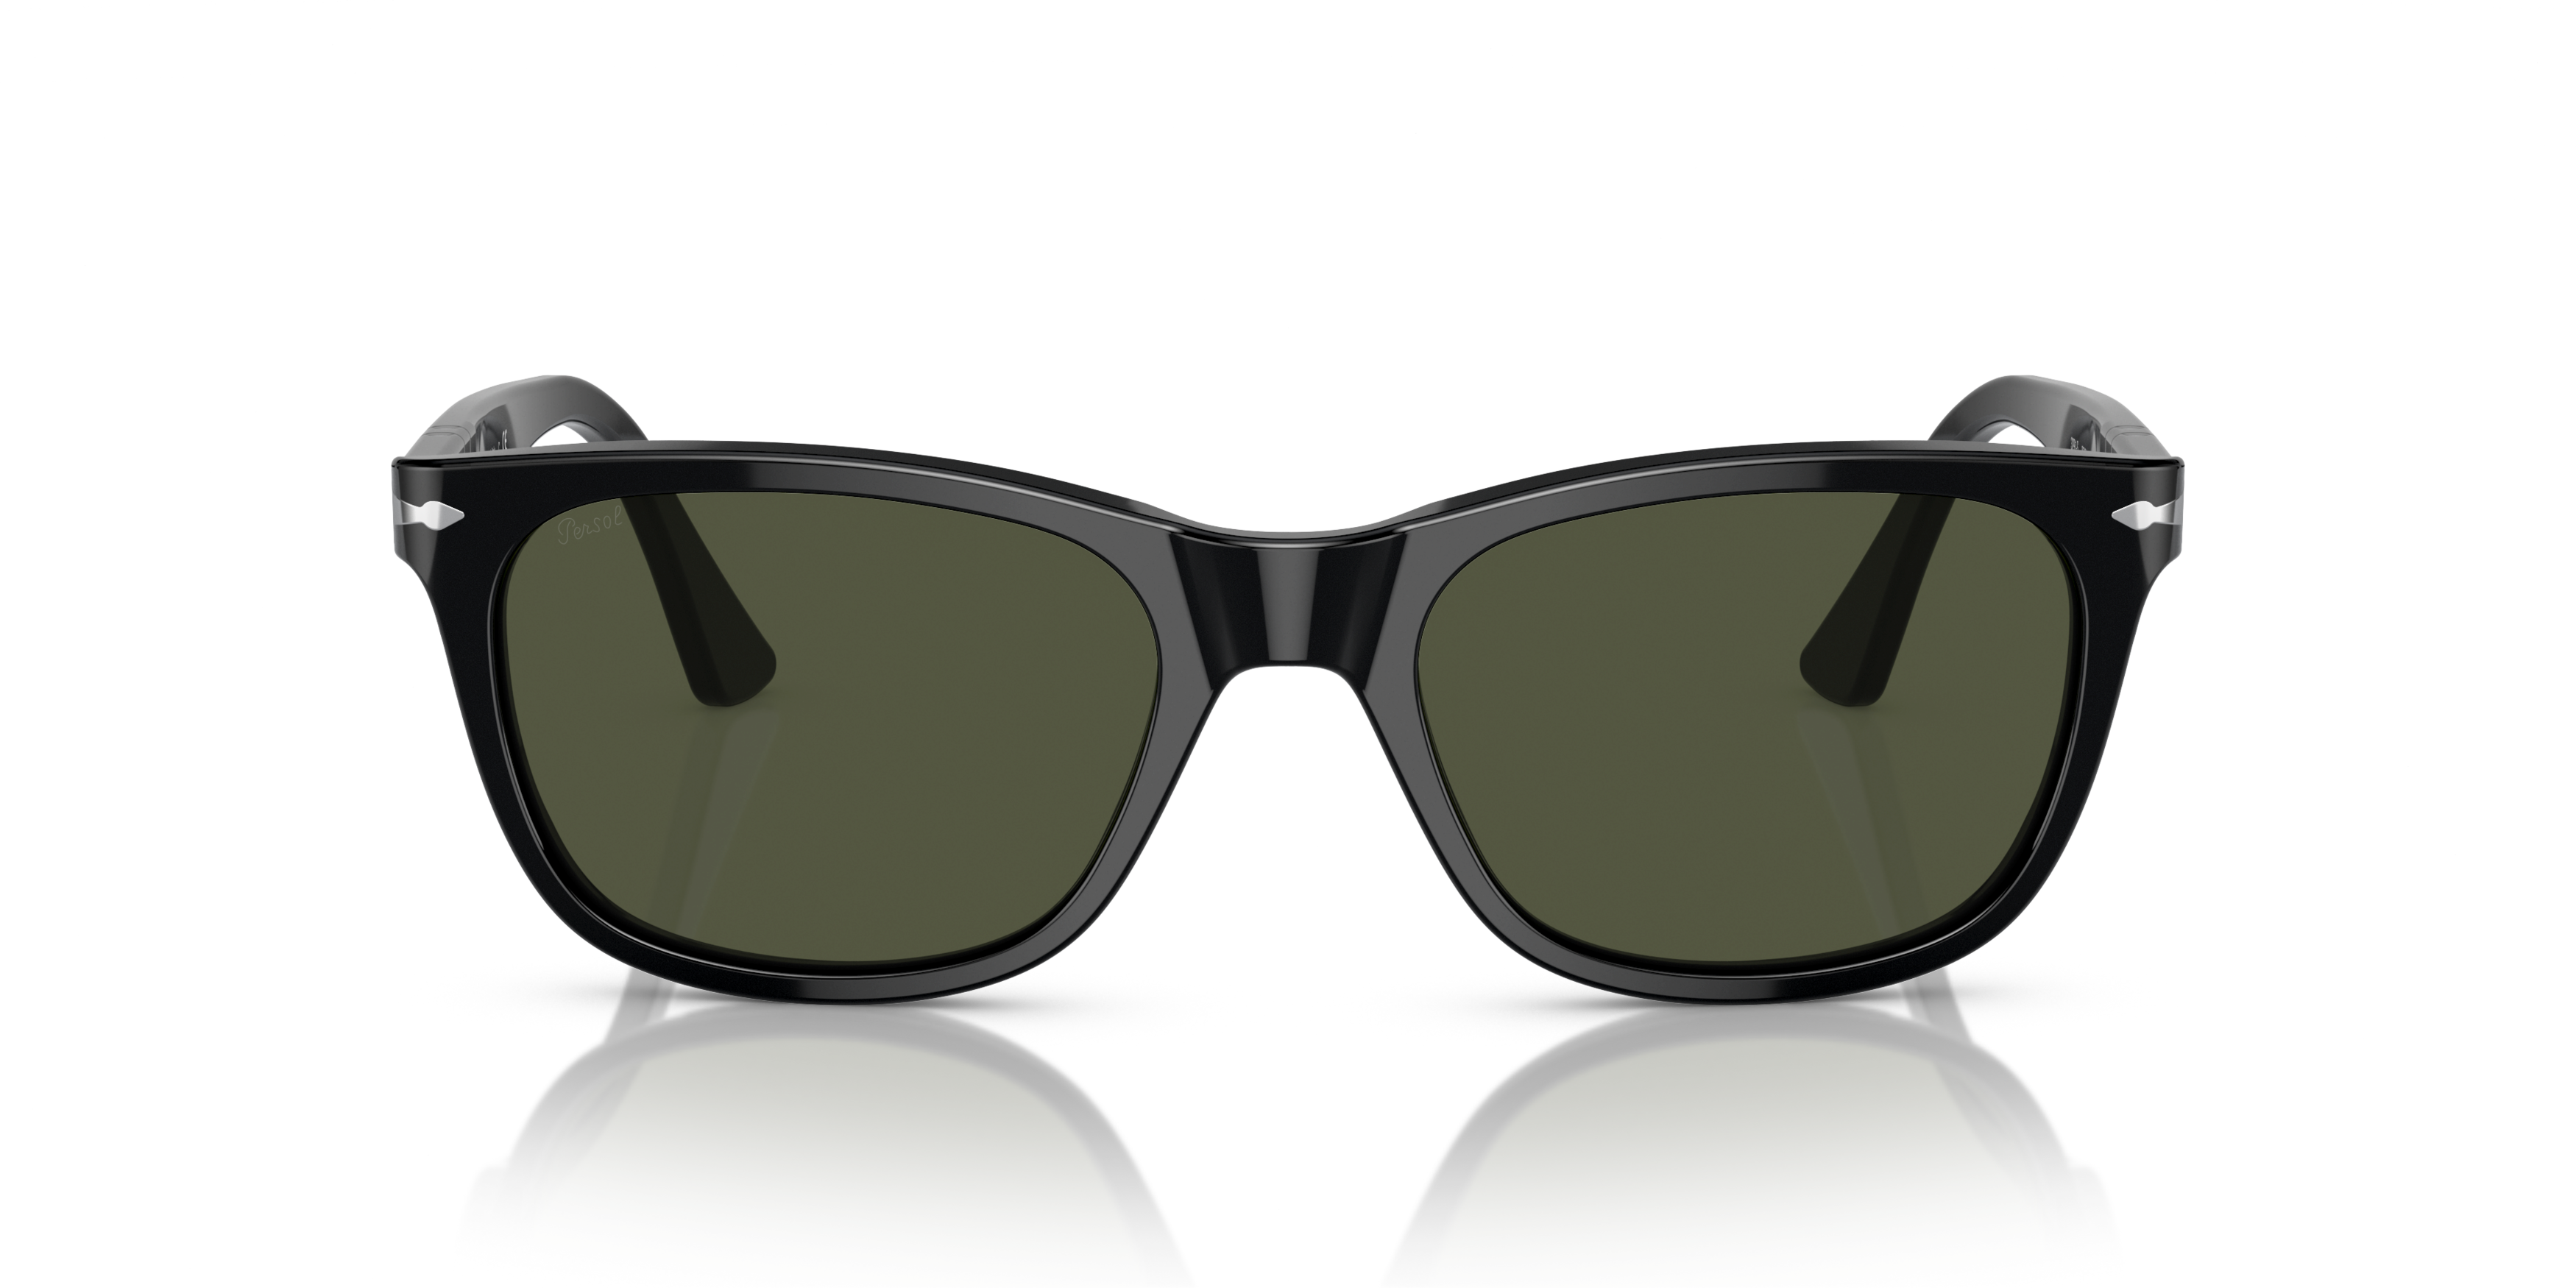 [products.image.front] Persol PO3291S 95/31